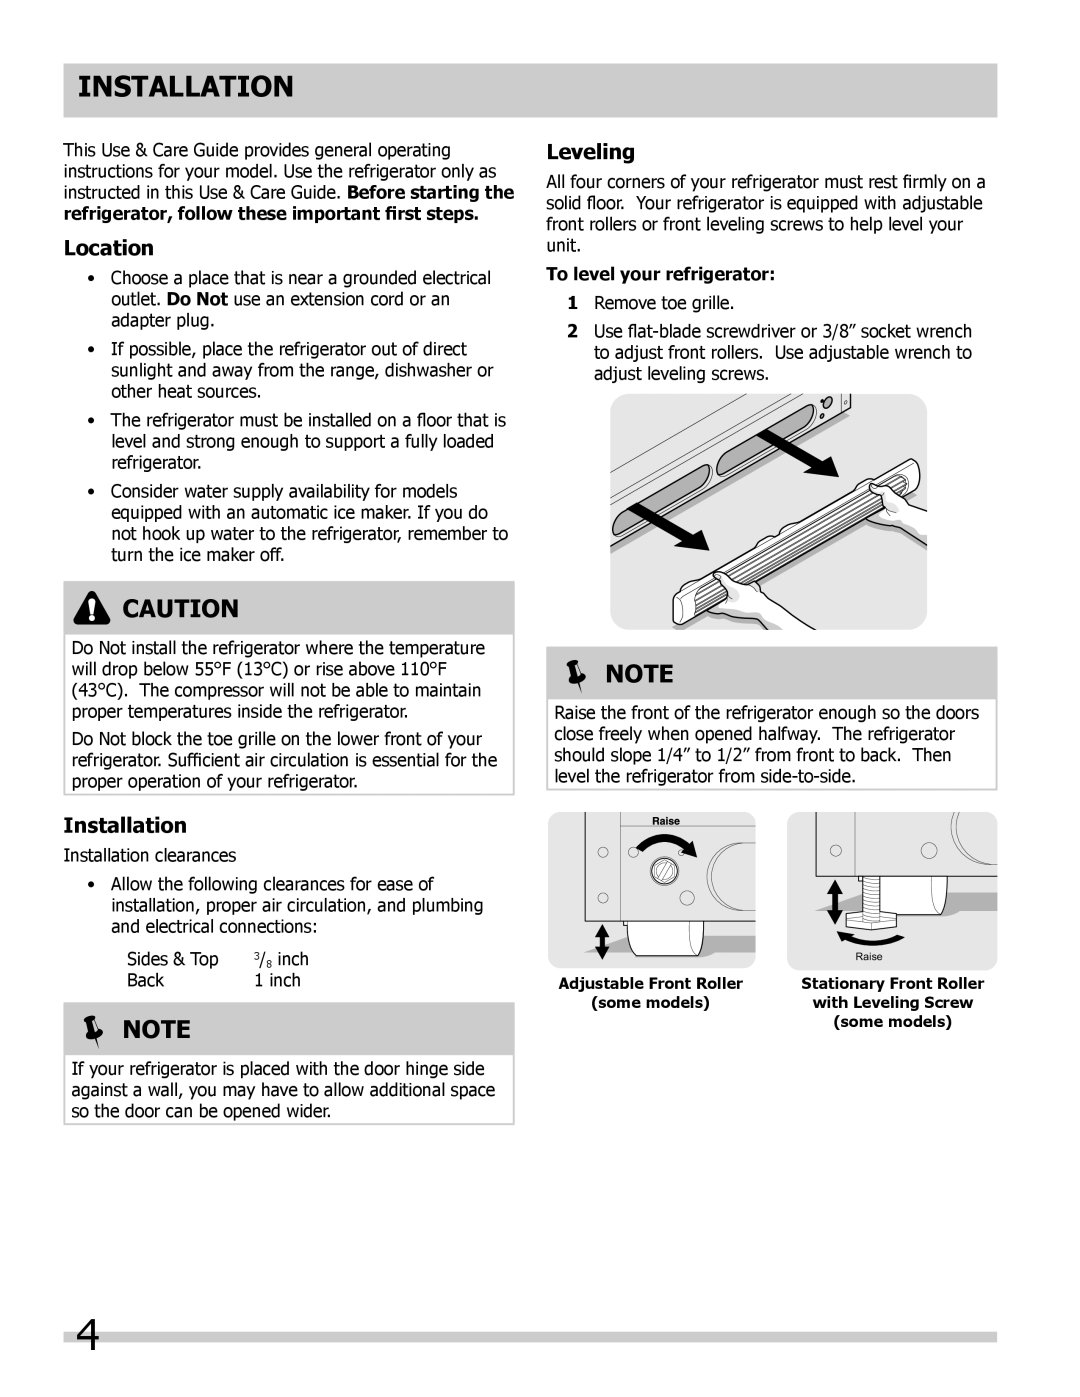 Frigidaire FFHT1816LS, FFHT1817LB, FFHT1814LM manual Installation,  Note, Location, To level your refrigerator, Leveling 